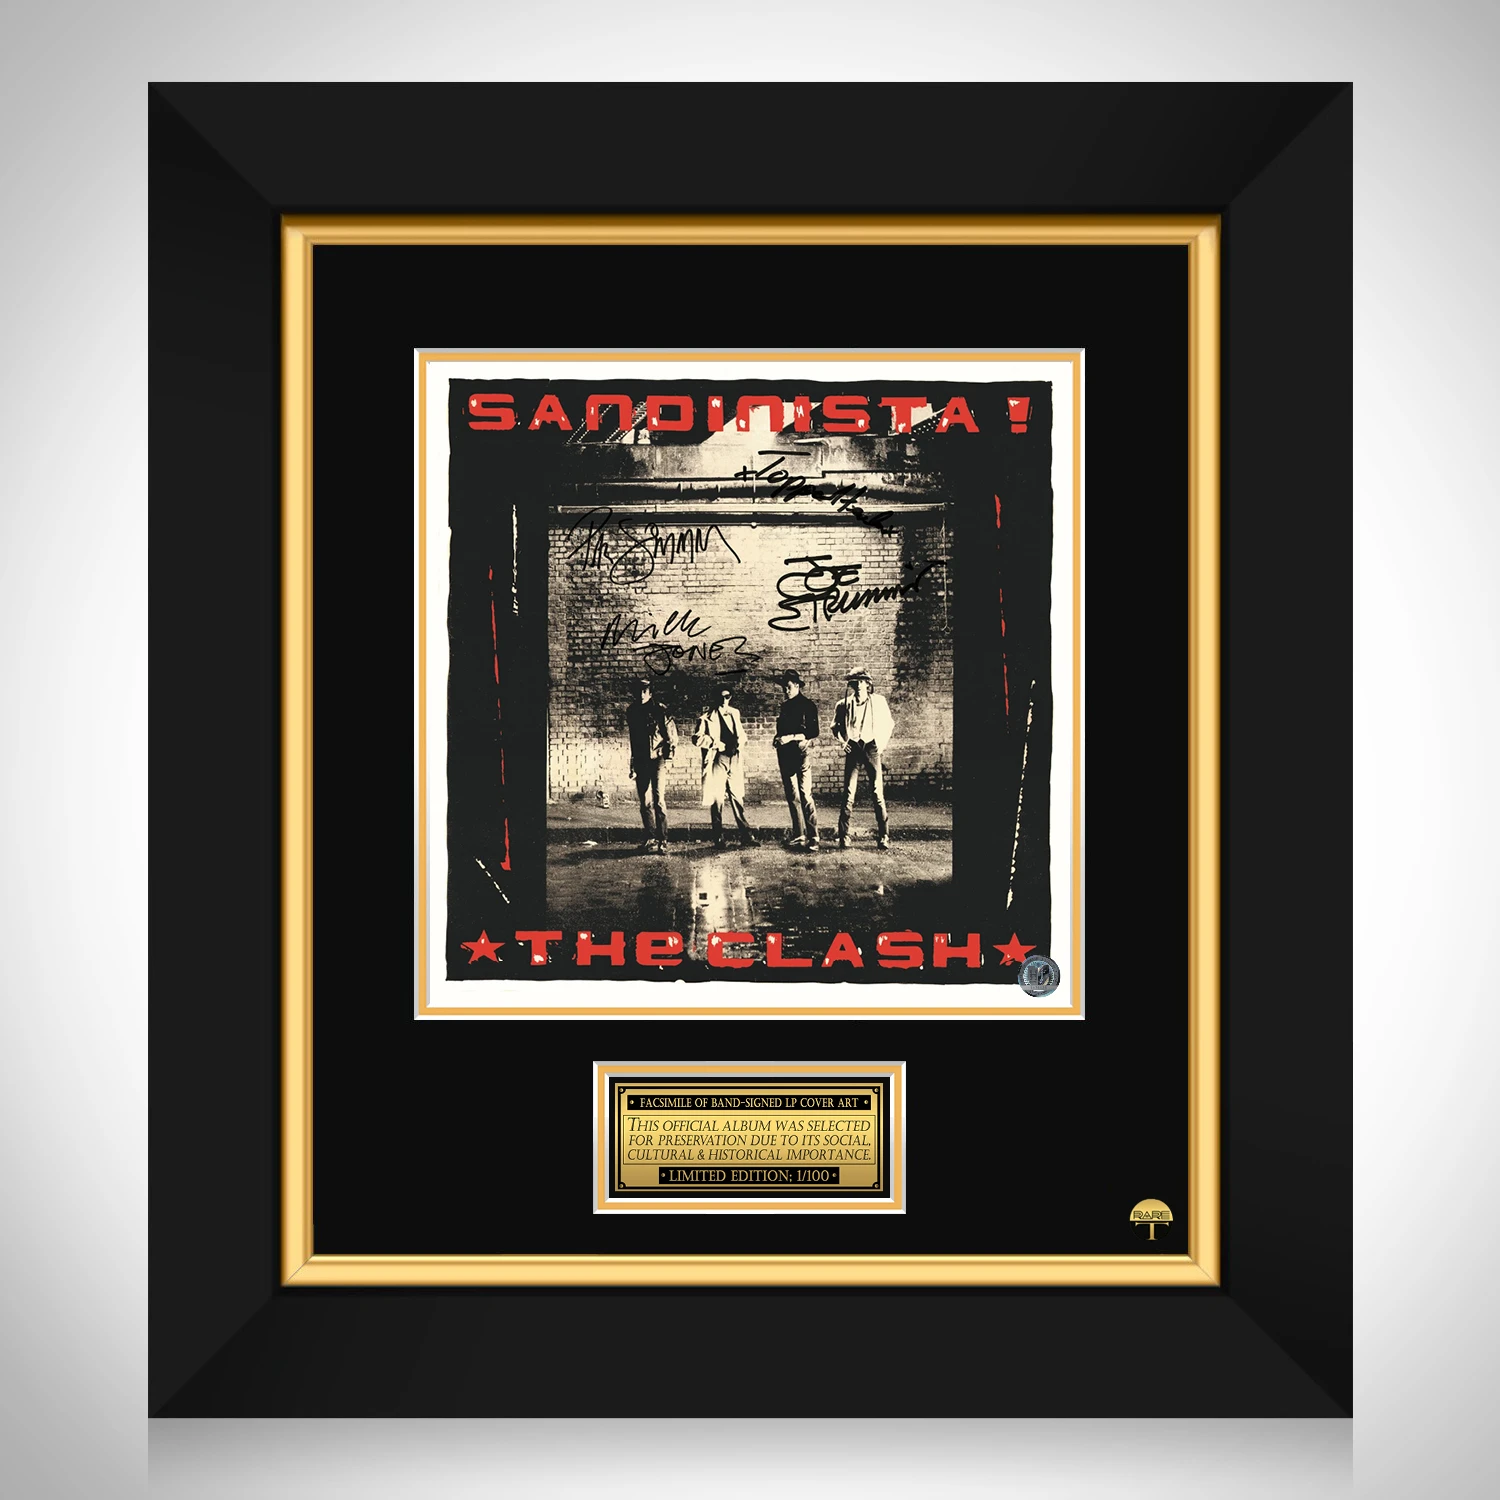 Theclash21 27 recordcover 1 thumb200